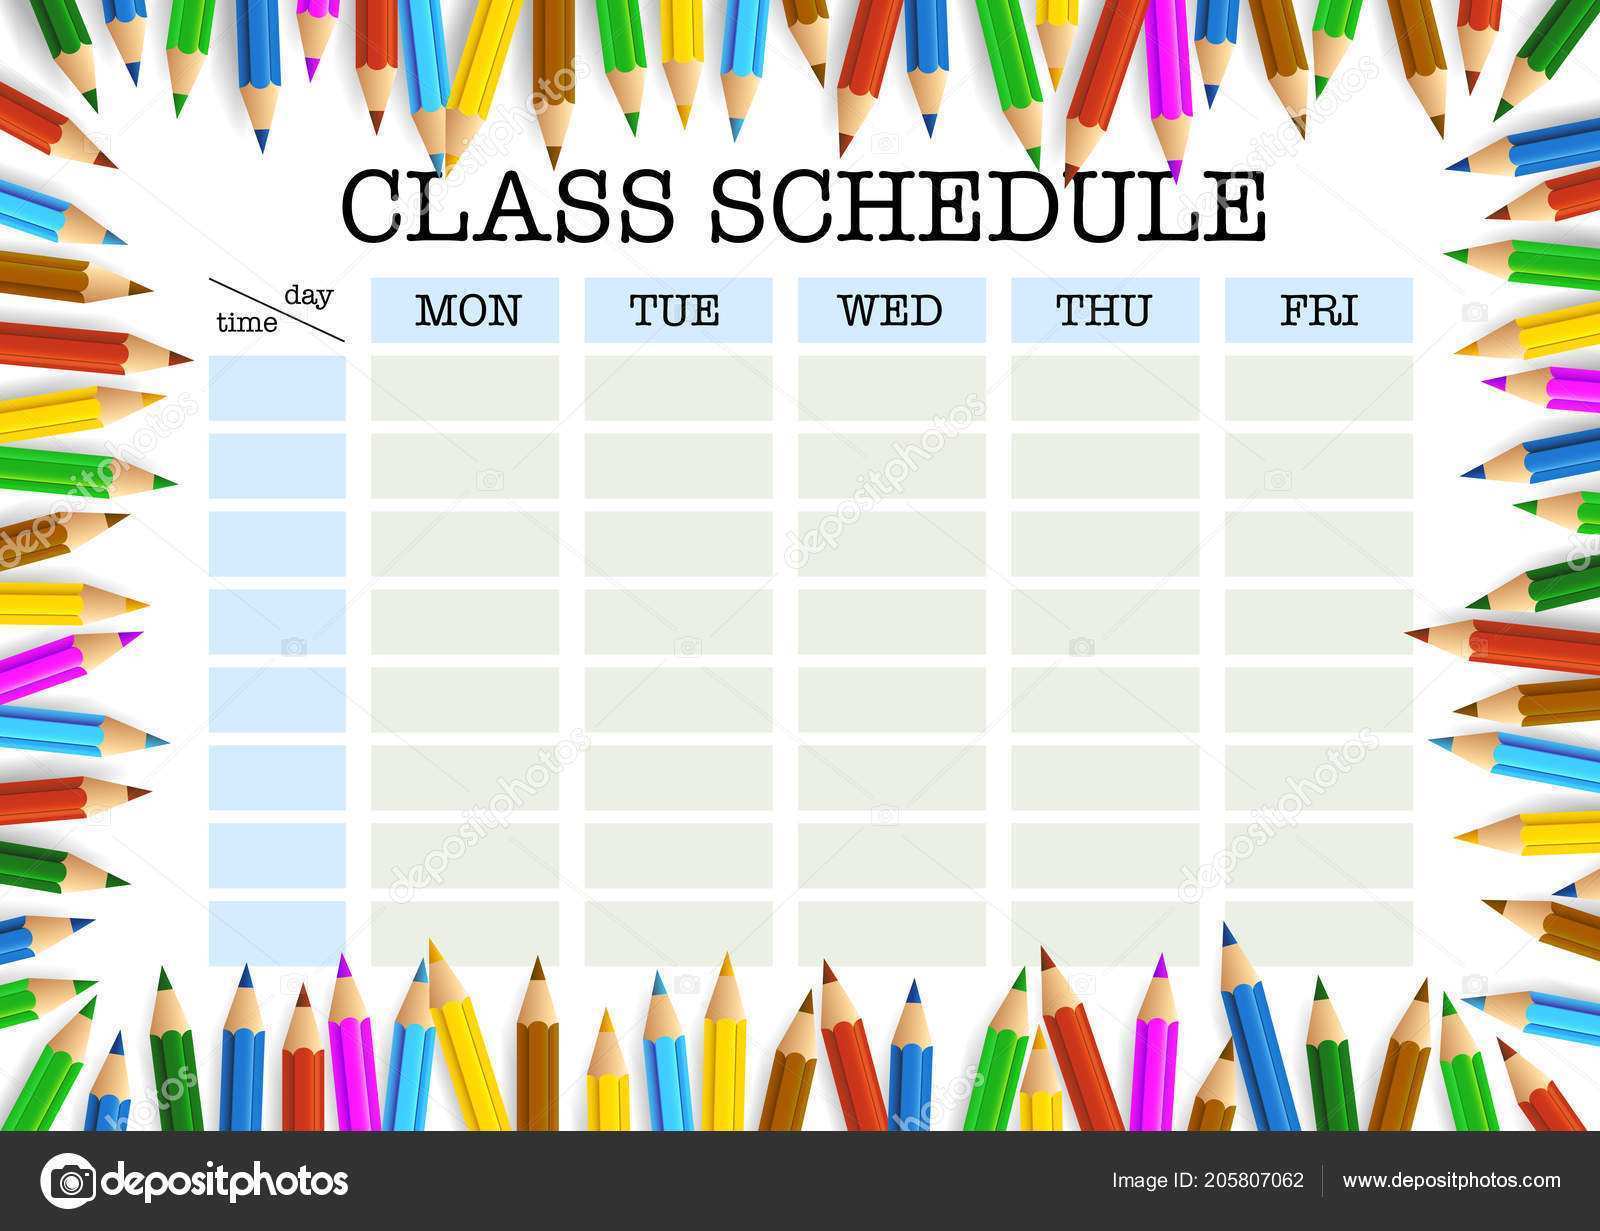 class-schedule-template-pdf-cards-design-templates-images-and-photos